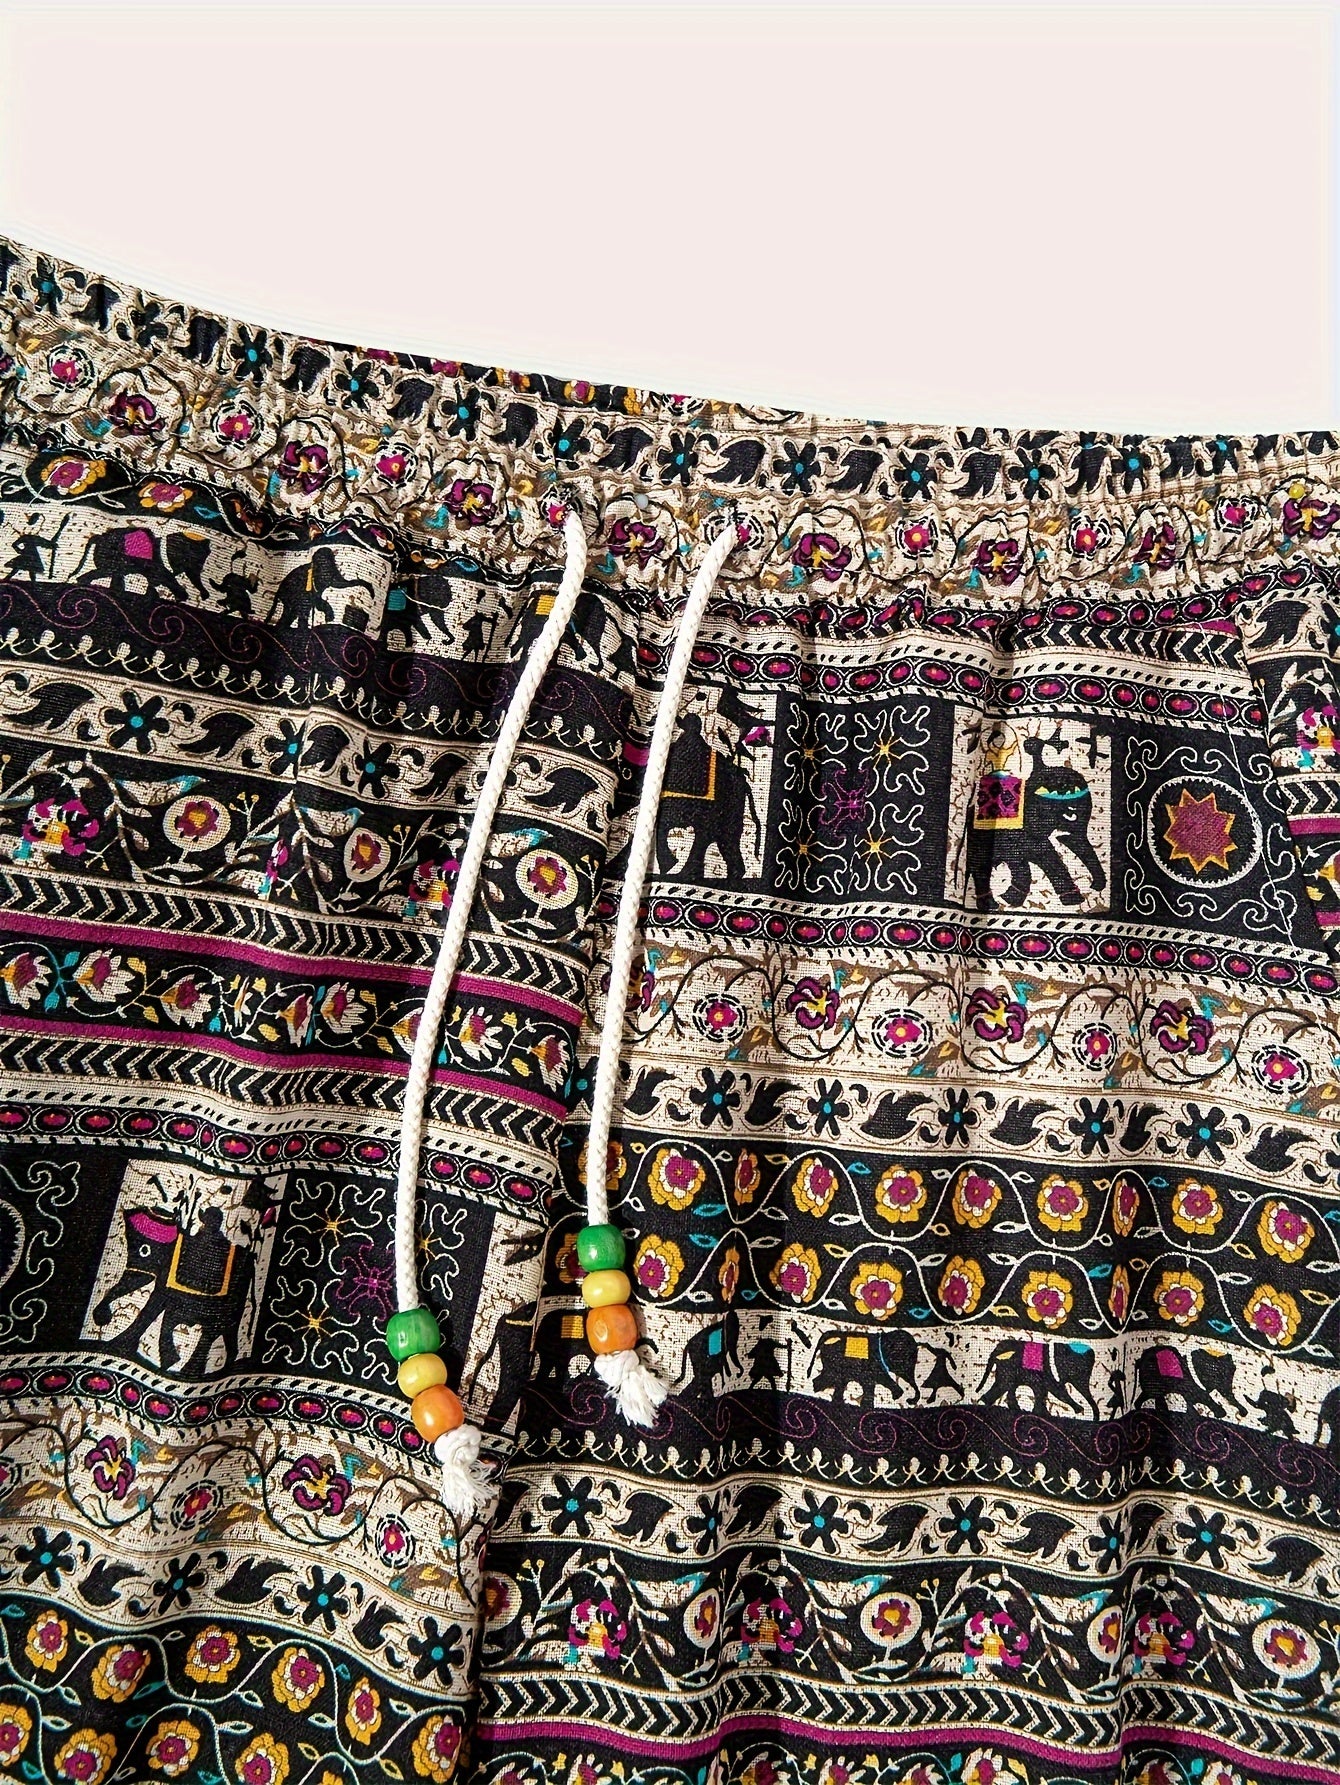 100% Cotton Mens Ethnic Print Pants, Relaxed Fit - Cosmic Serenity Shop